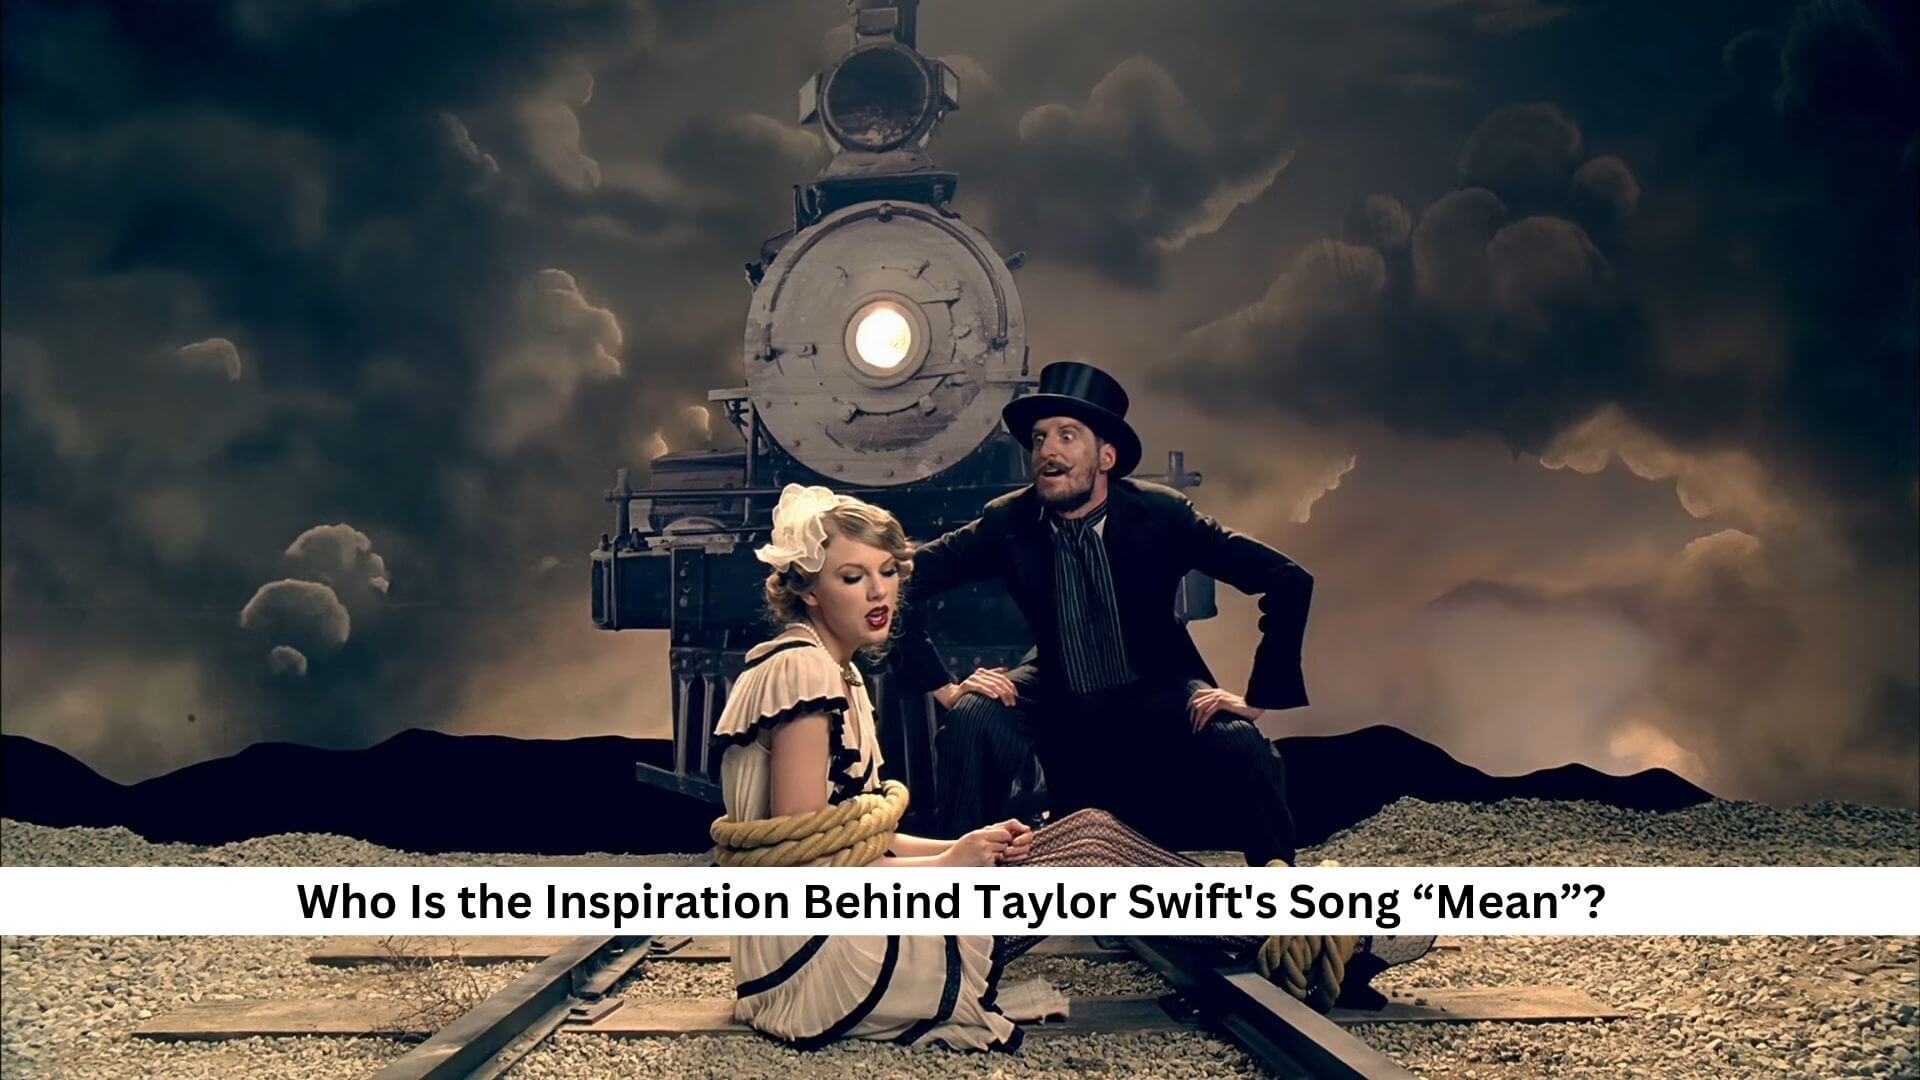 Who Is the Inspiration Behind Taylor Swift's Song “Mean”?